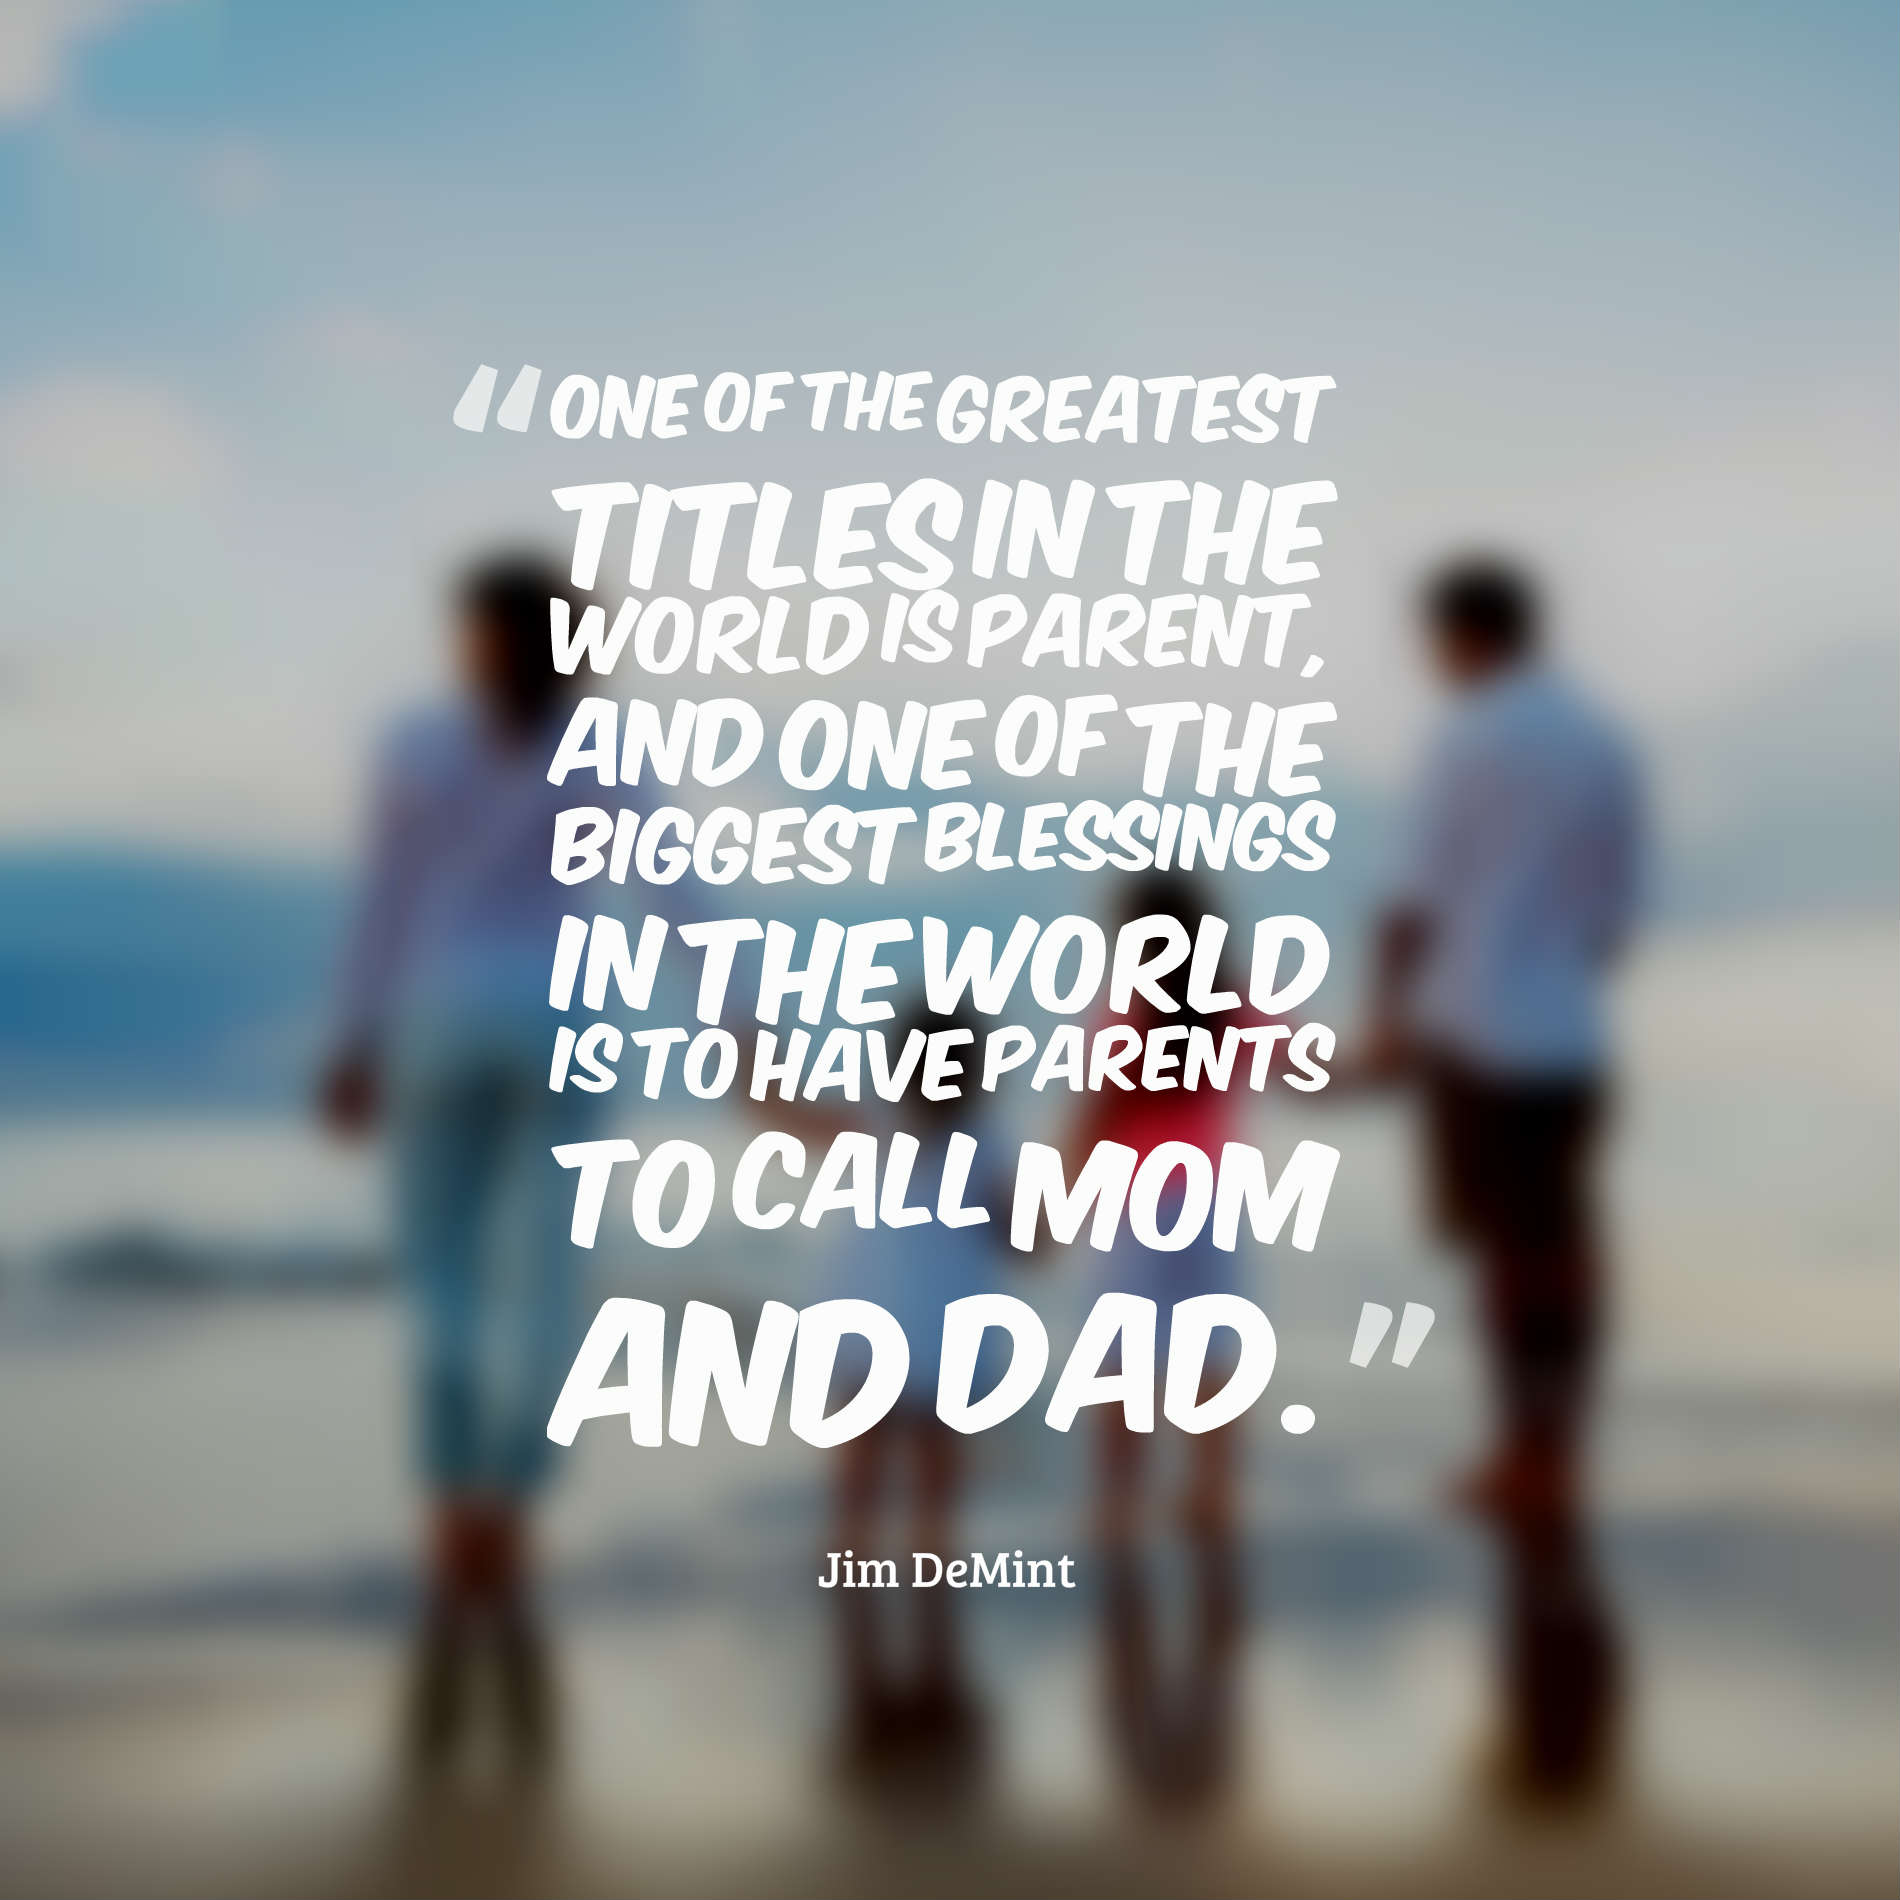 One of the greatest titles in the world is parent, and one of the biggest blessings in the world is to have parents to call mom and dad.